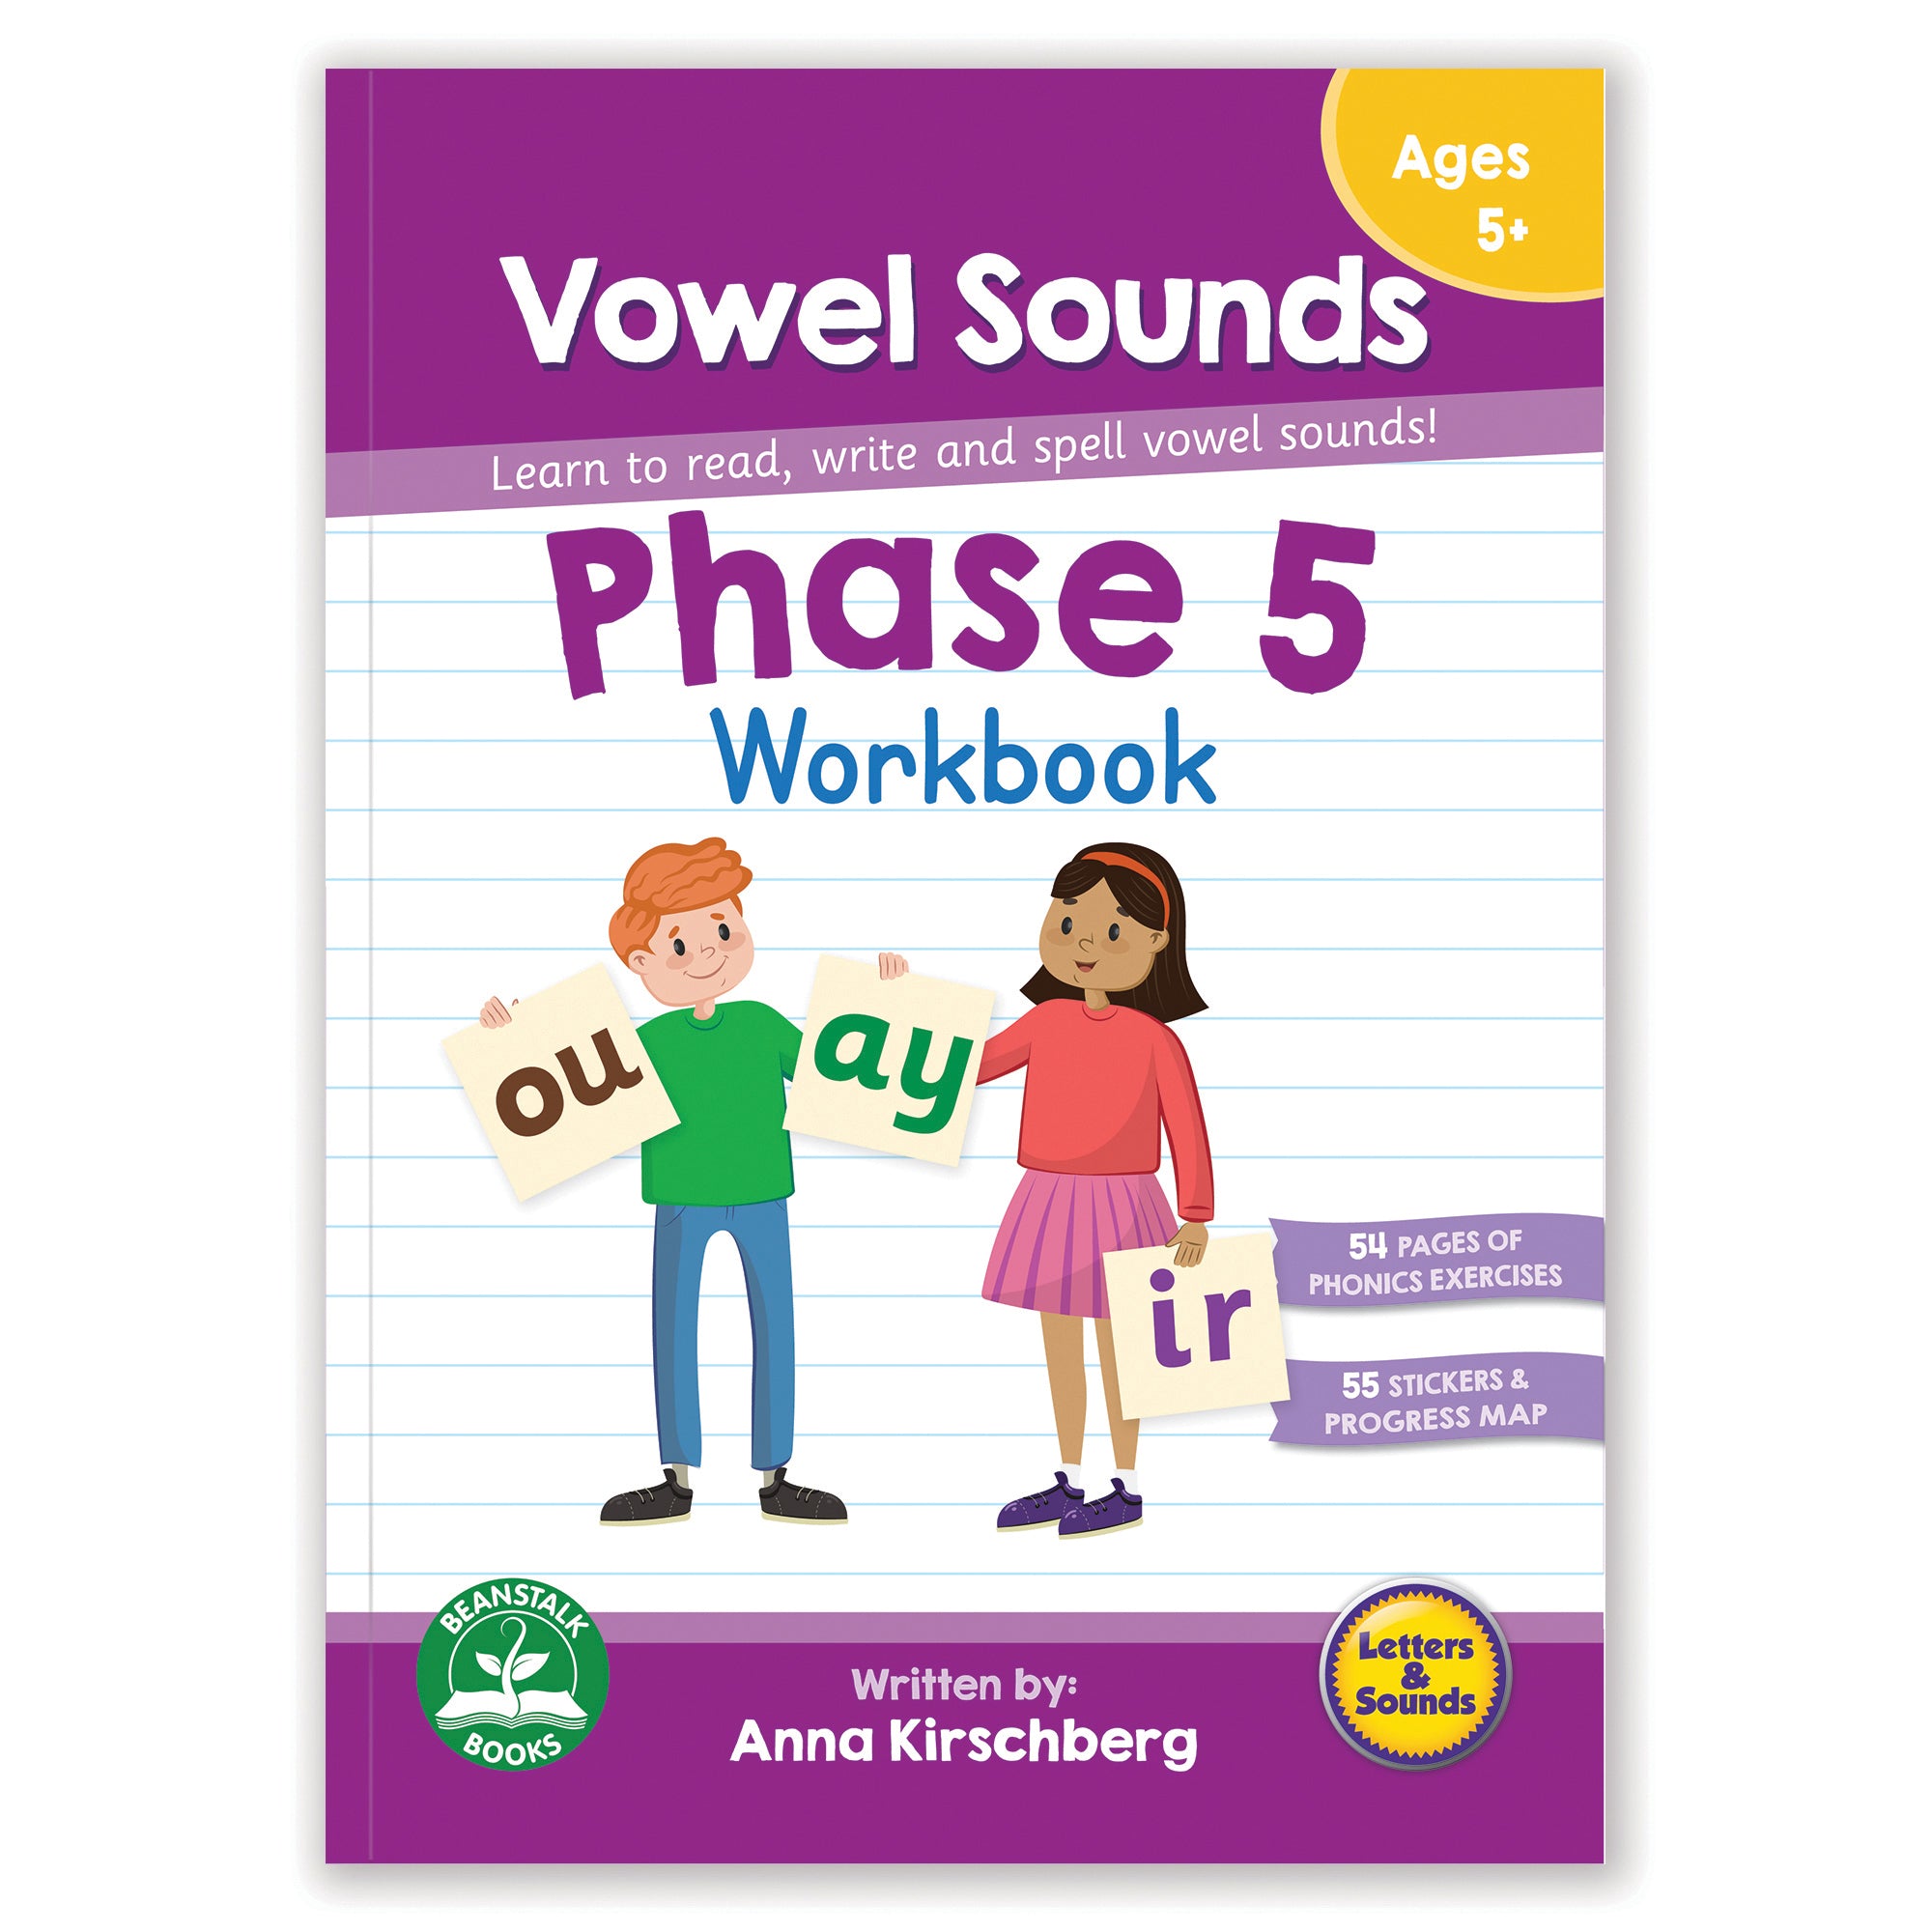 Letters and Sounds Phase 5 Vowel Sounds Classroom Kit